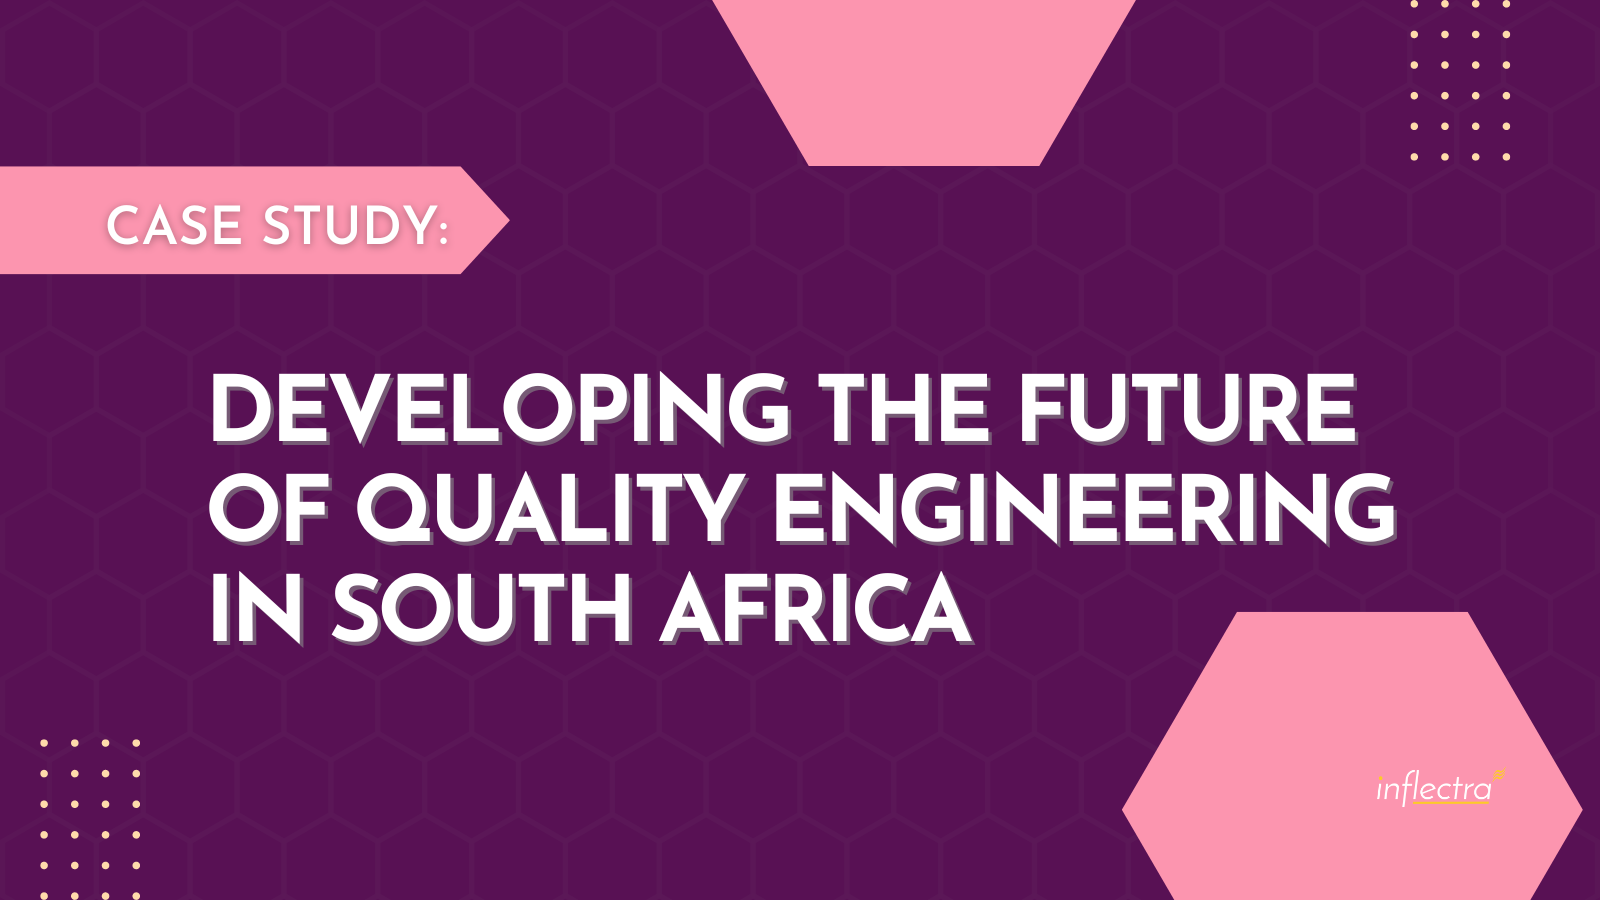 case-study-developing-the-future-of-quality-engineering-in-south-africa-inflectra-image